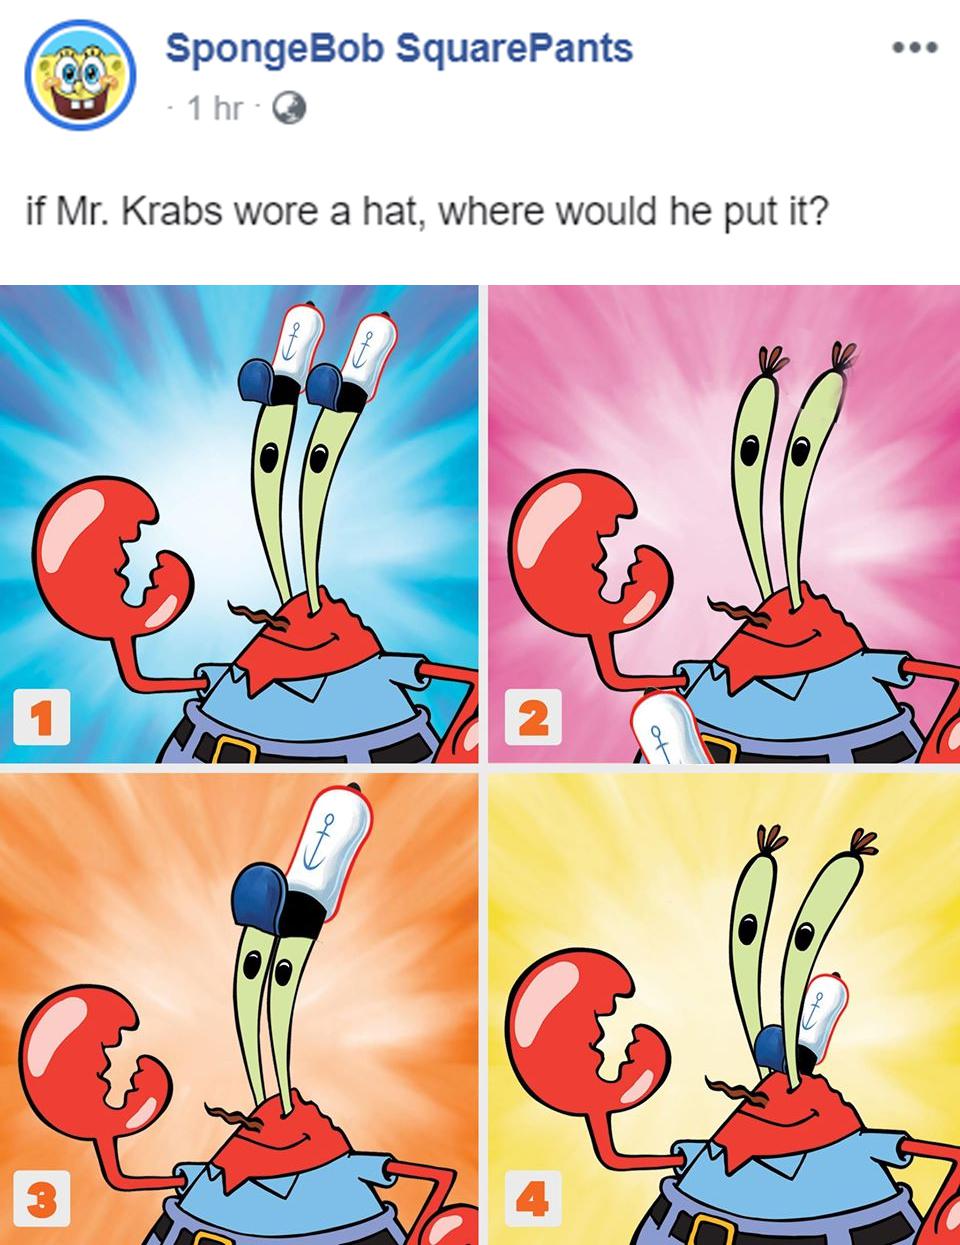 Spongebob,  Spongebob Memes Spongebob,  text: SpongeBob SquarePants Ihr if Mr. Krabs wore a hat, where would he put it? 